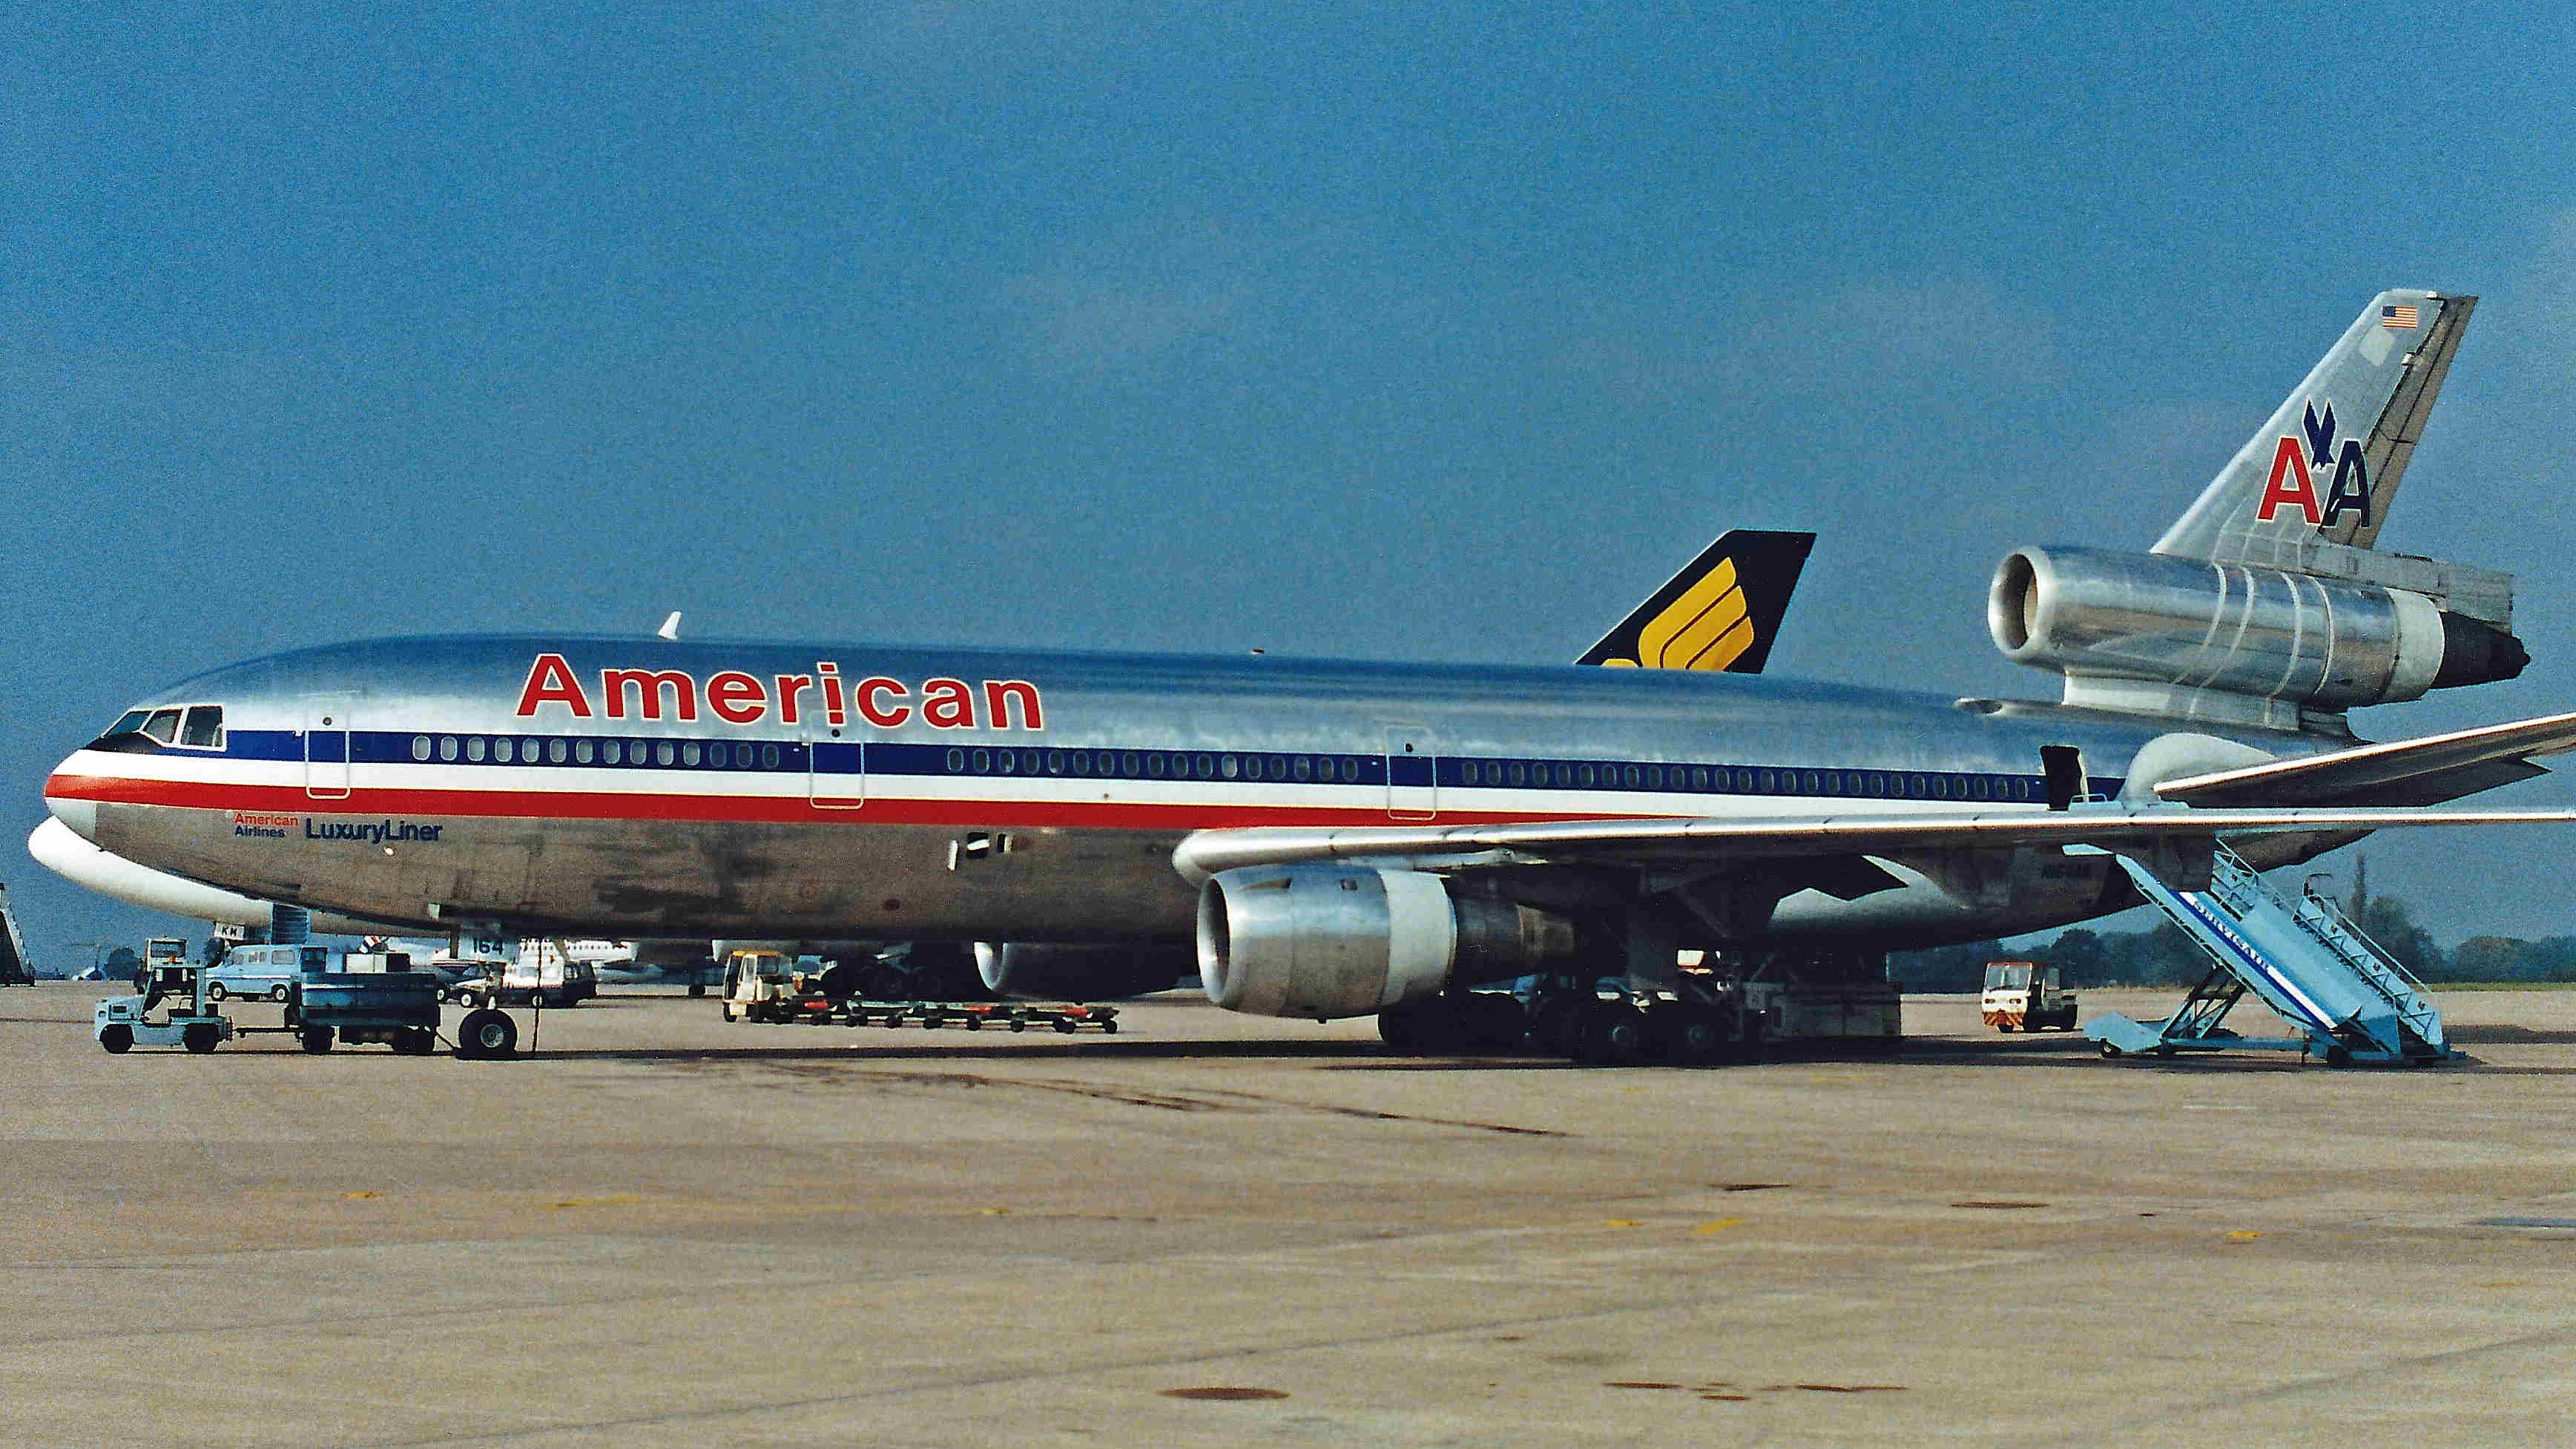 An American Airlines DC-10  on an airport apron parked next to a Singapore Airlines aircraft.